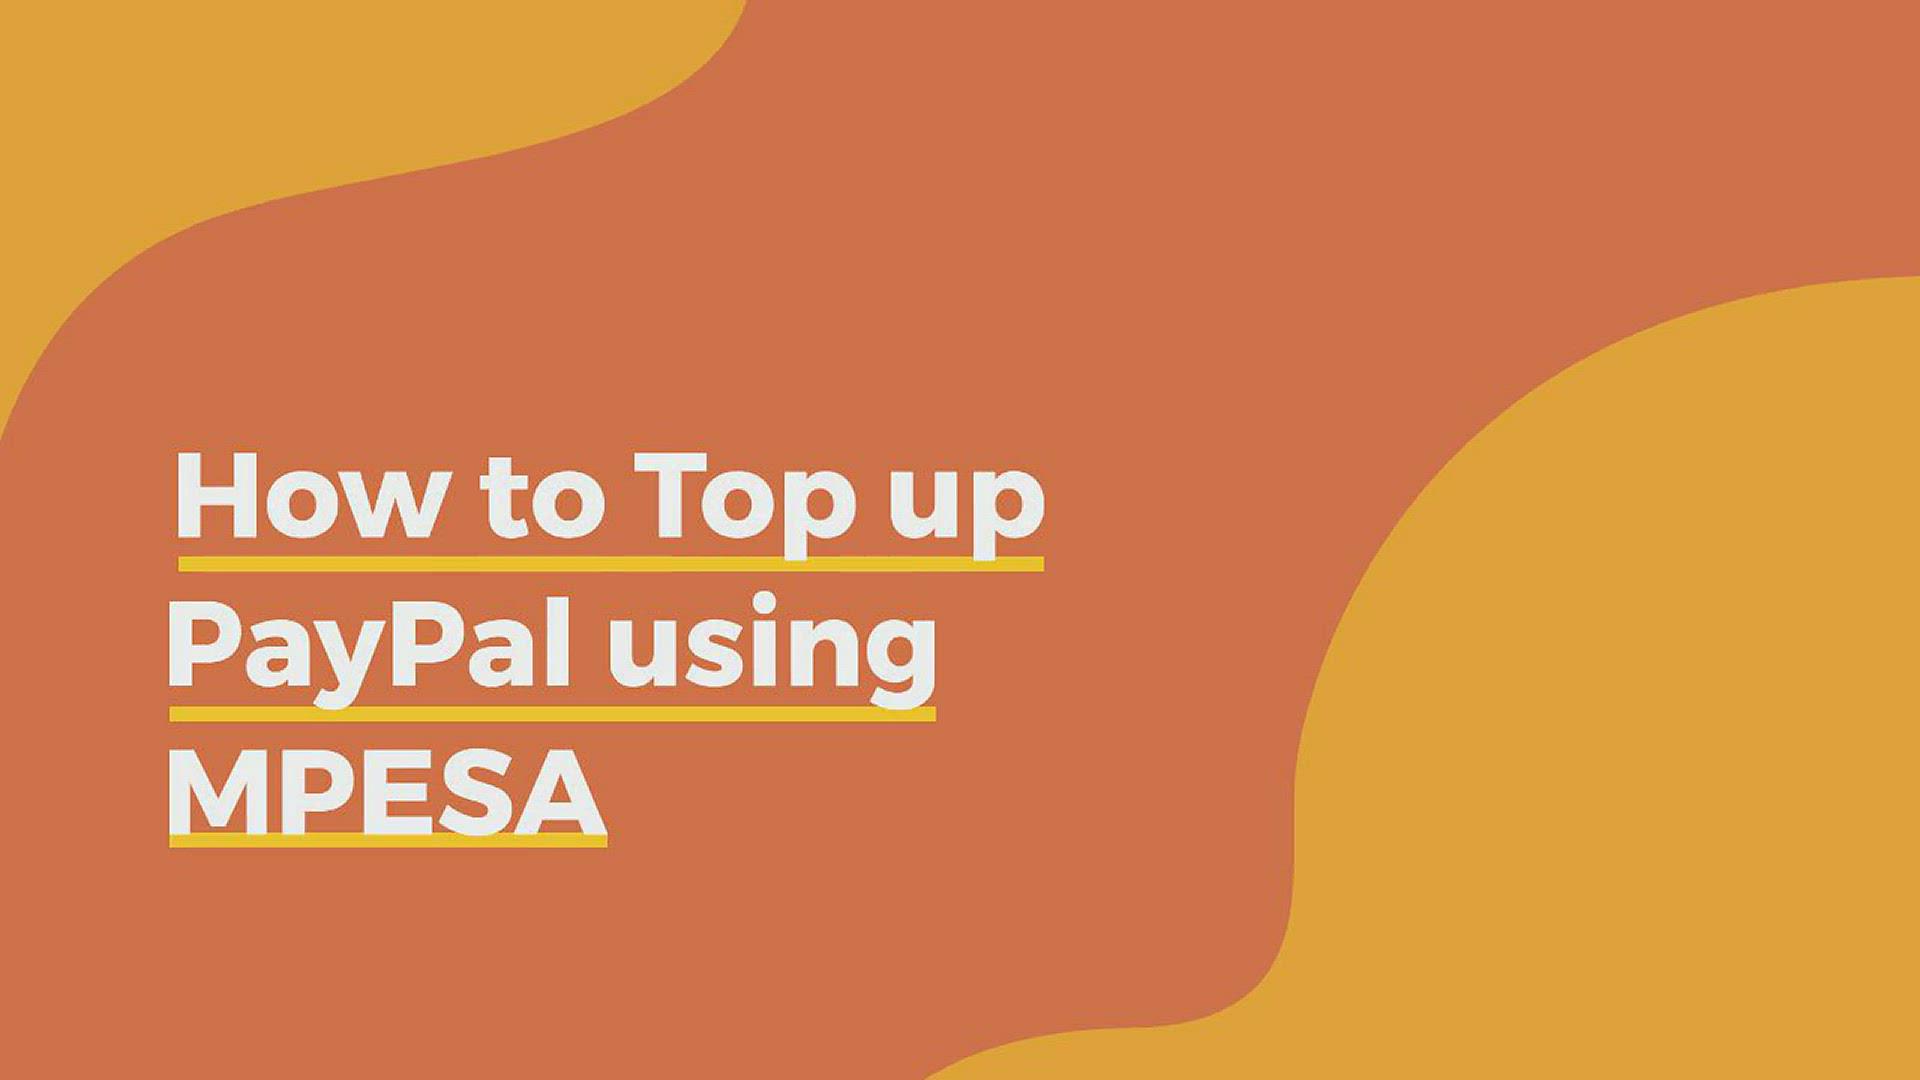 'Video thumbnail for How to Top Up PayPal with MPESA'